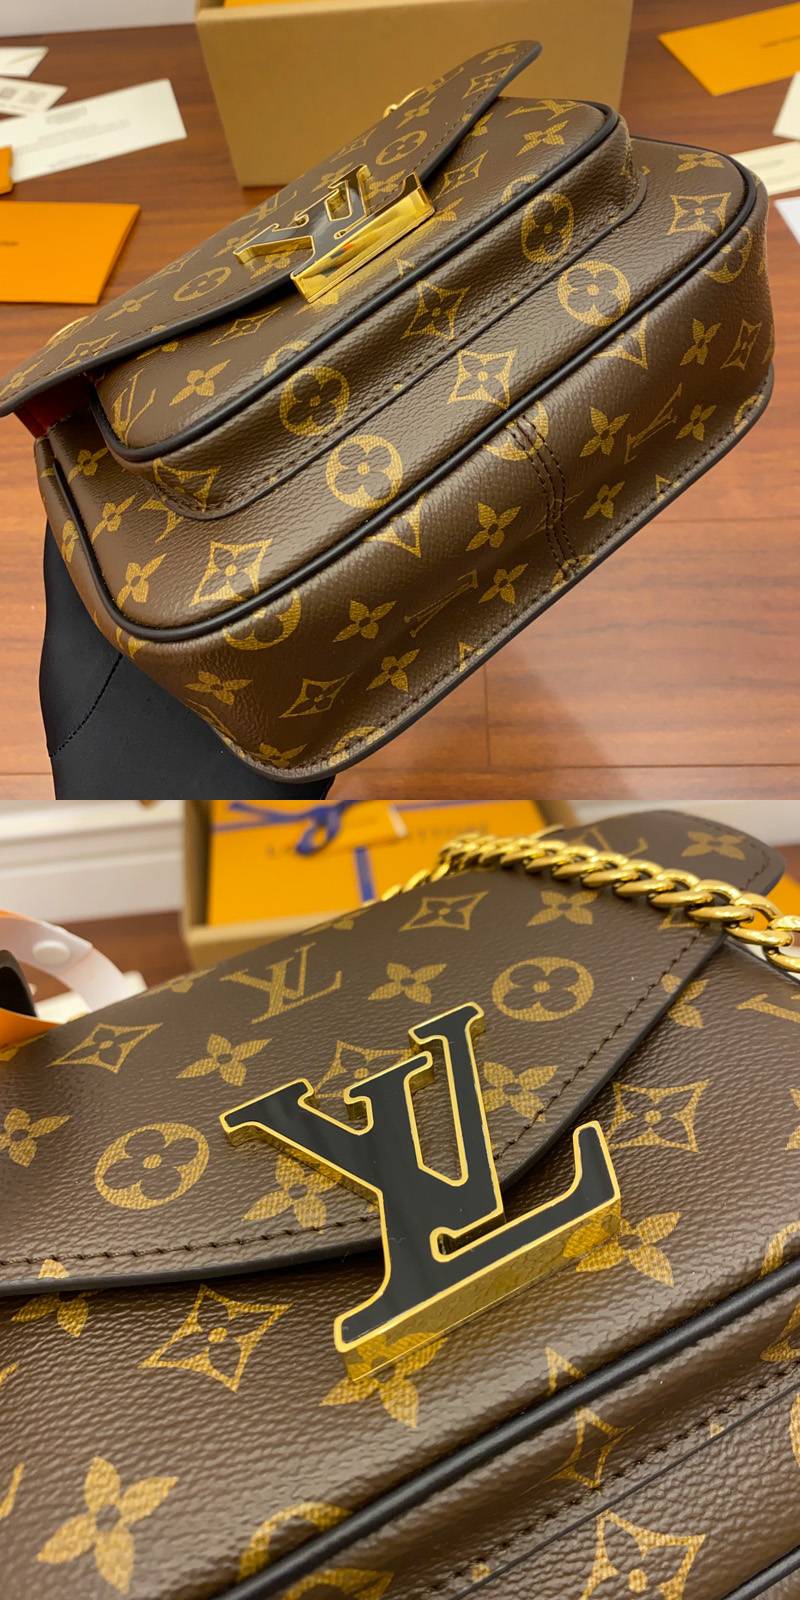 LV, PASSY, chain bag, official website, price